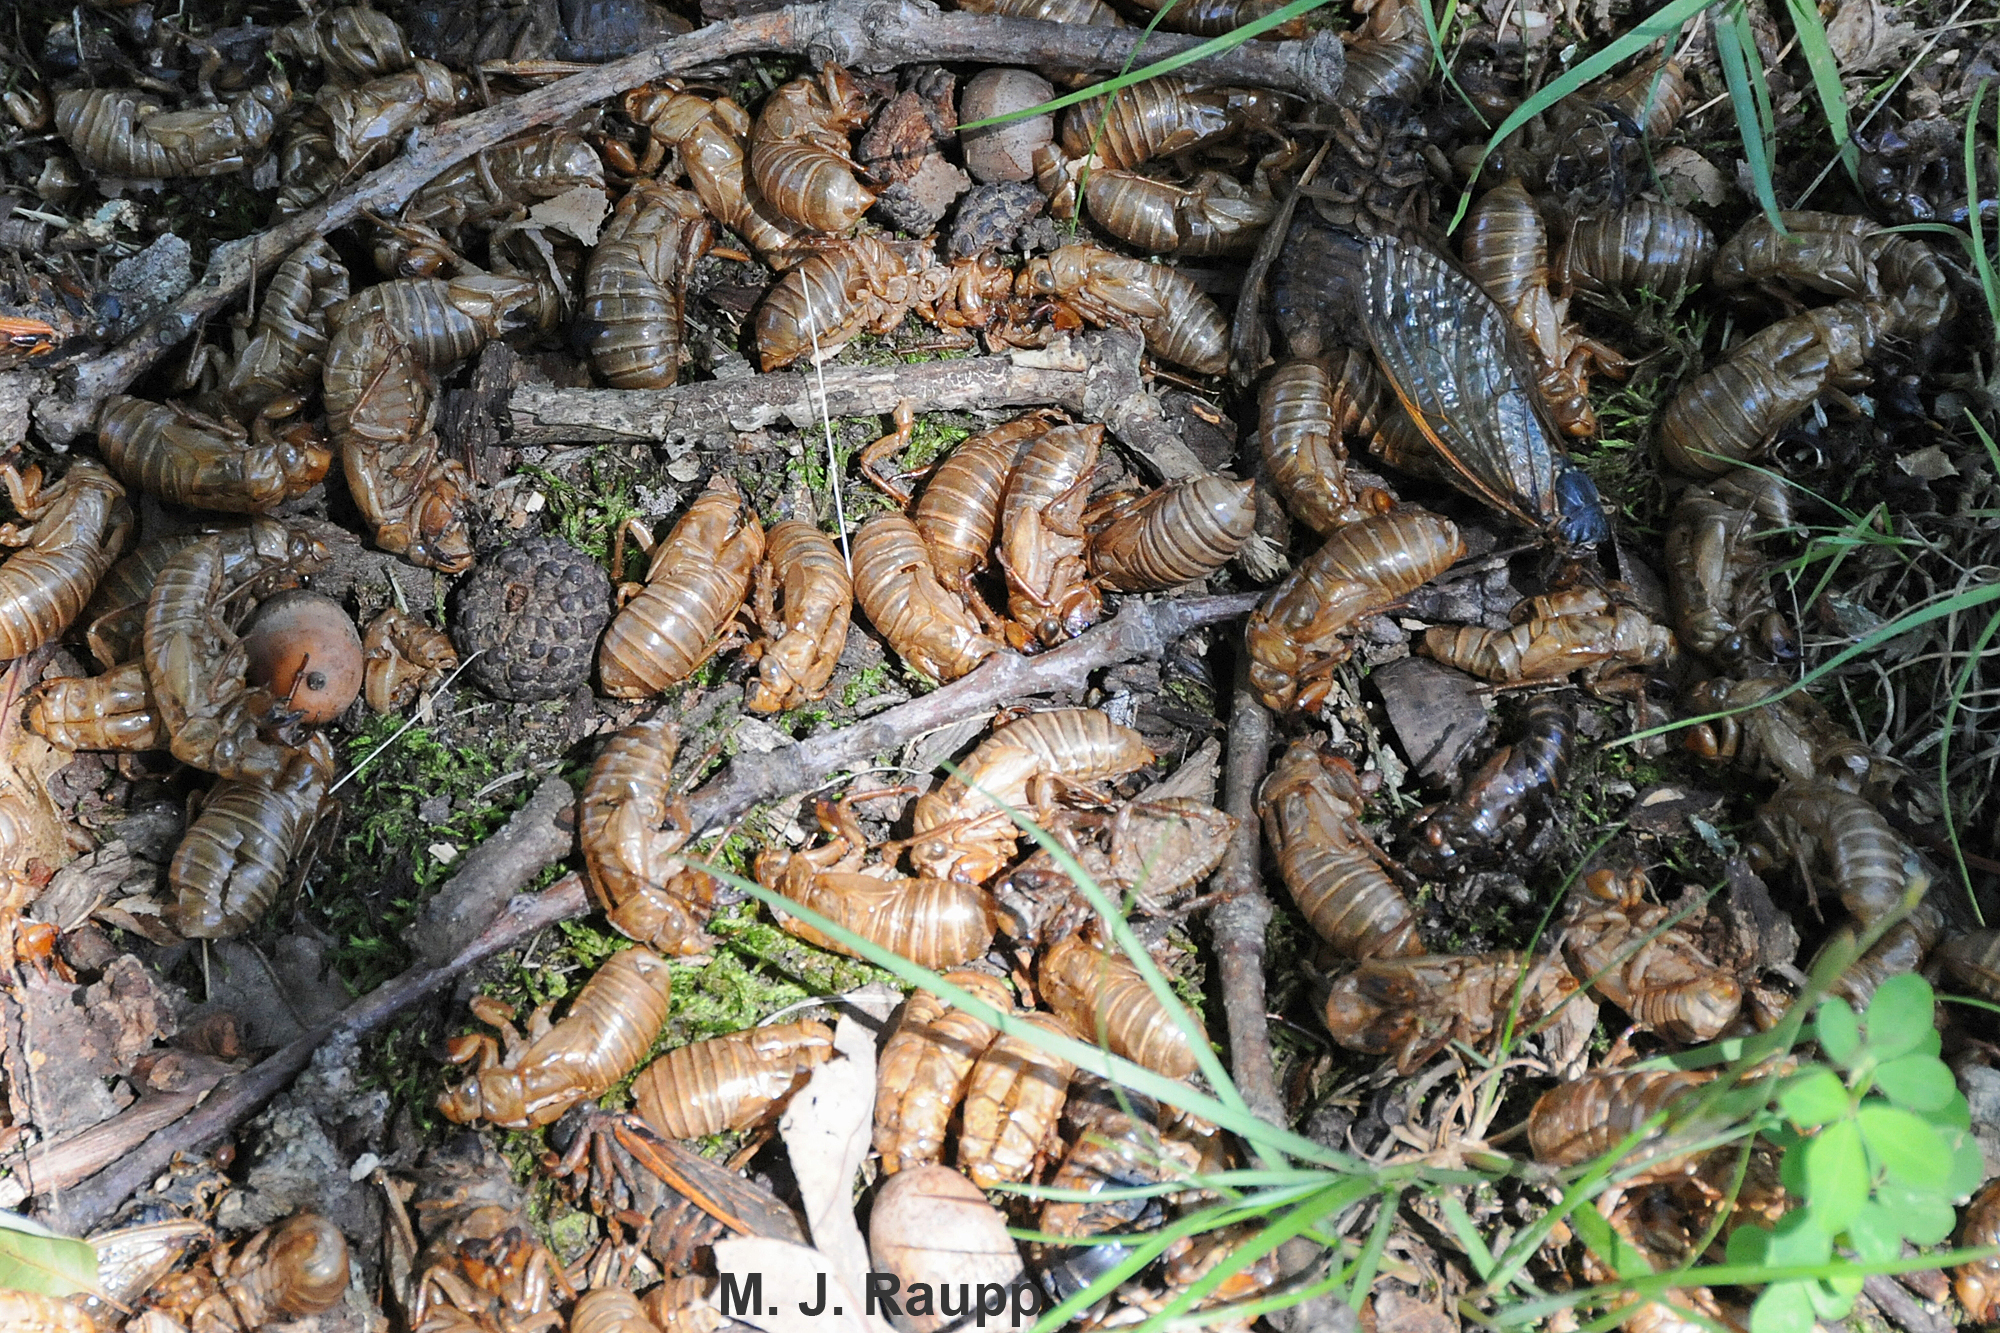 Up and down the east coast billions of cicadas will return nutrients to the trees from which they fed for 17 years.